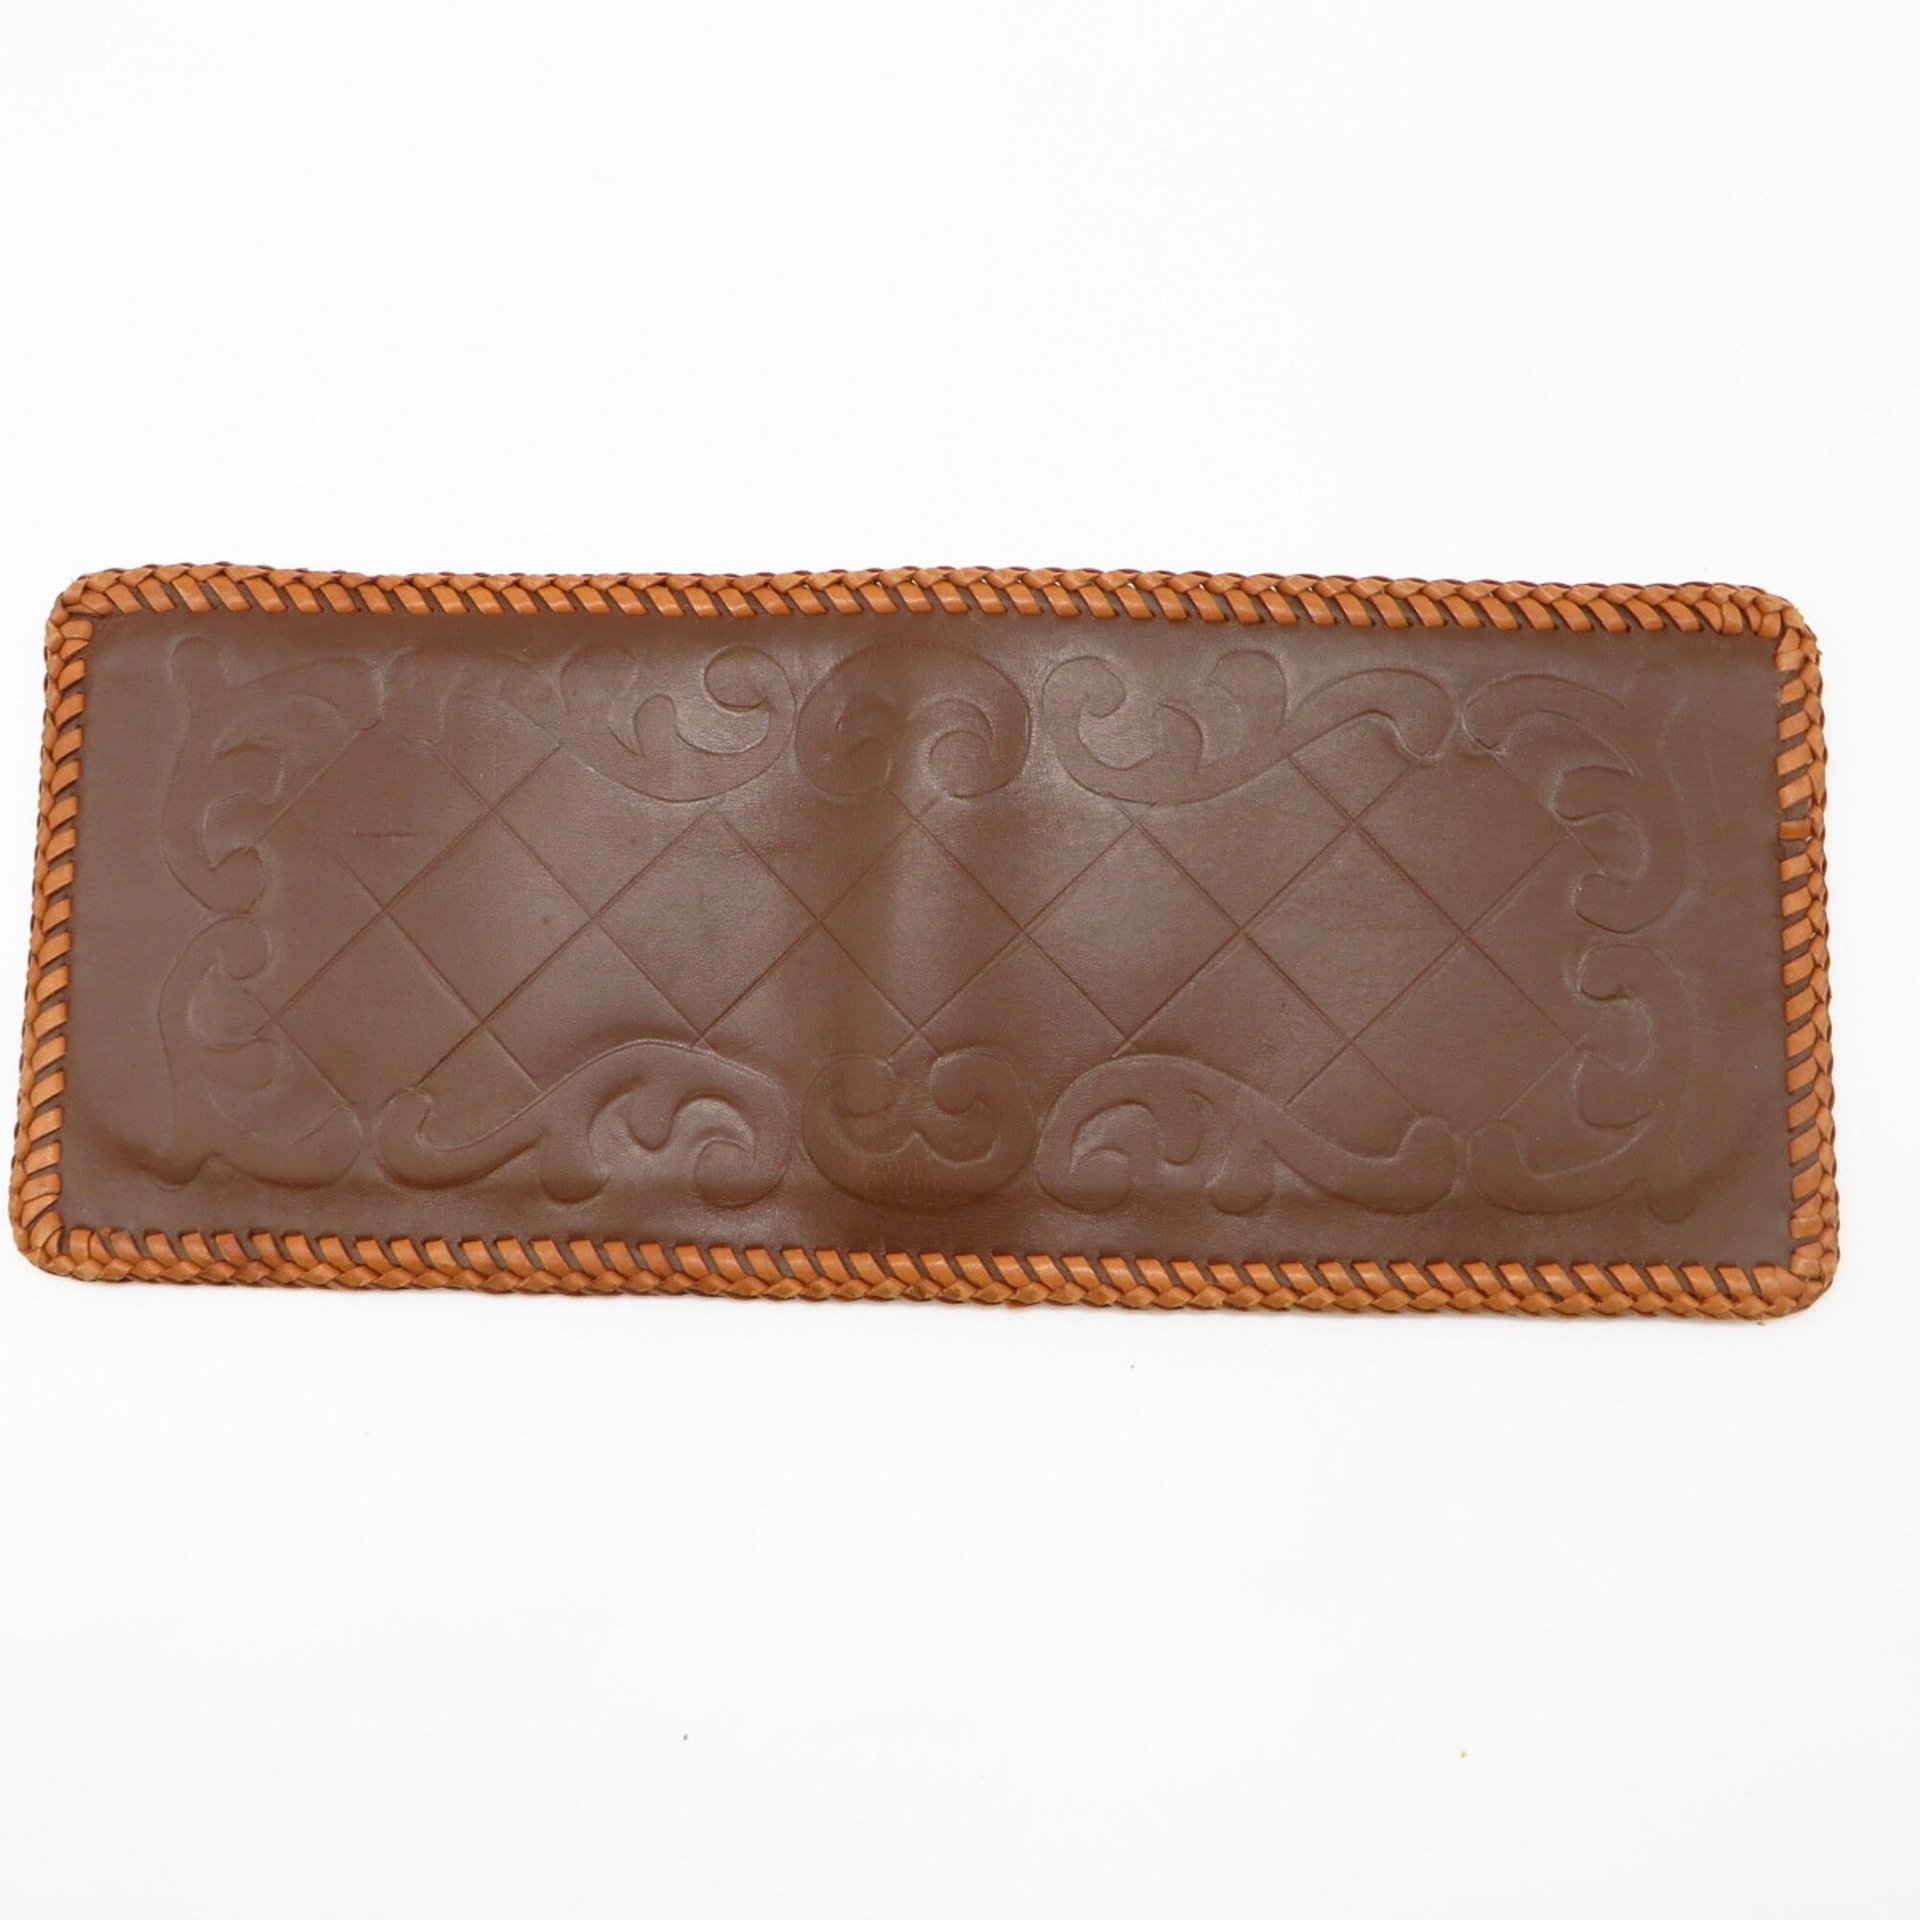 Hand Tooled Wallet, Brown and Butterscotch Leather Wallet